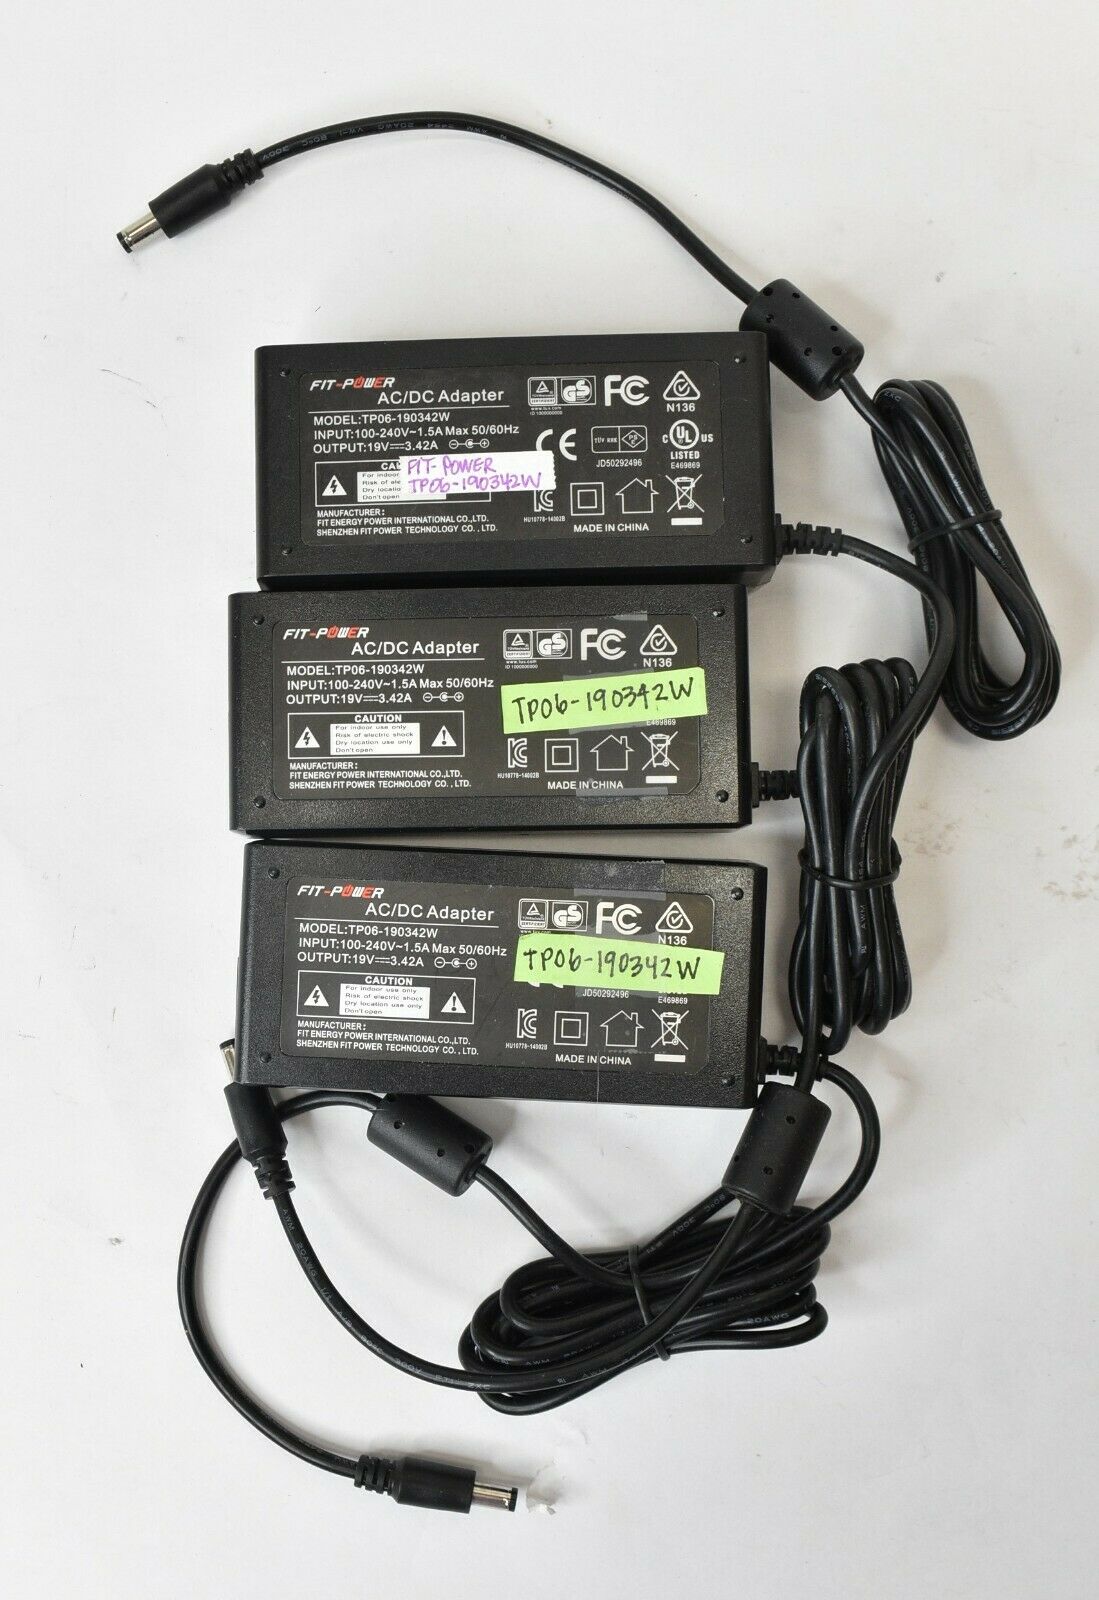 Lot of 3 Fit Energy Power AC/DC Power Supply Adapter TP06-190342W 19V 3.42A Type: AC/DC Adapter Connection Split/Dupl